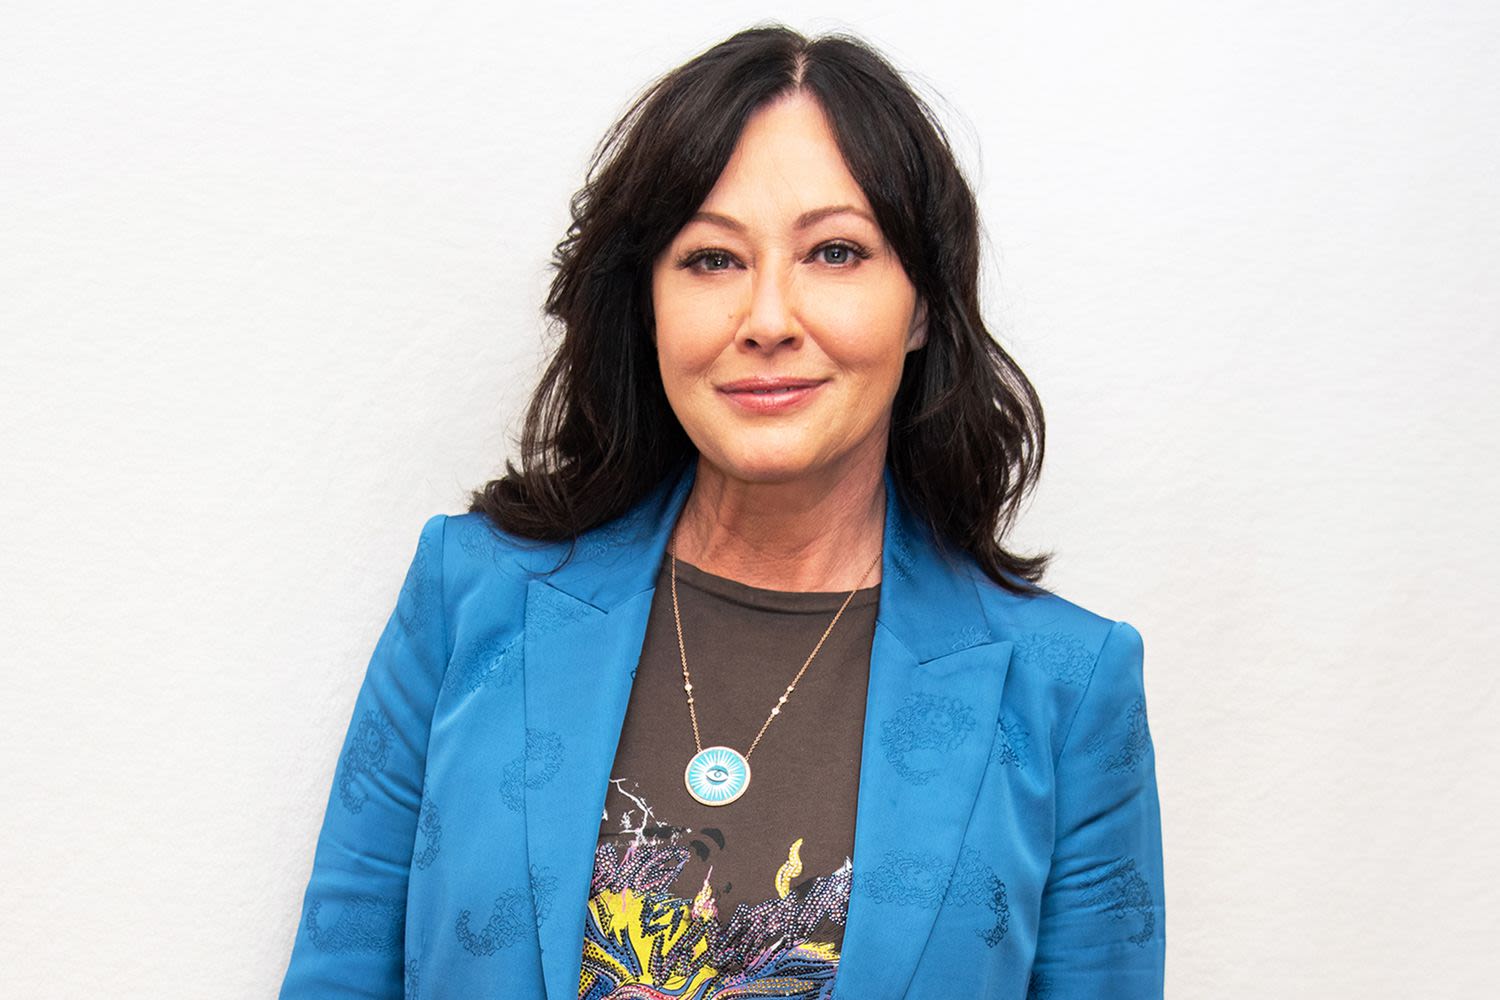 Shannen Doherty doesn't regret not returning for 'Charmed' finale